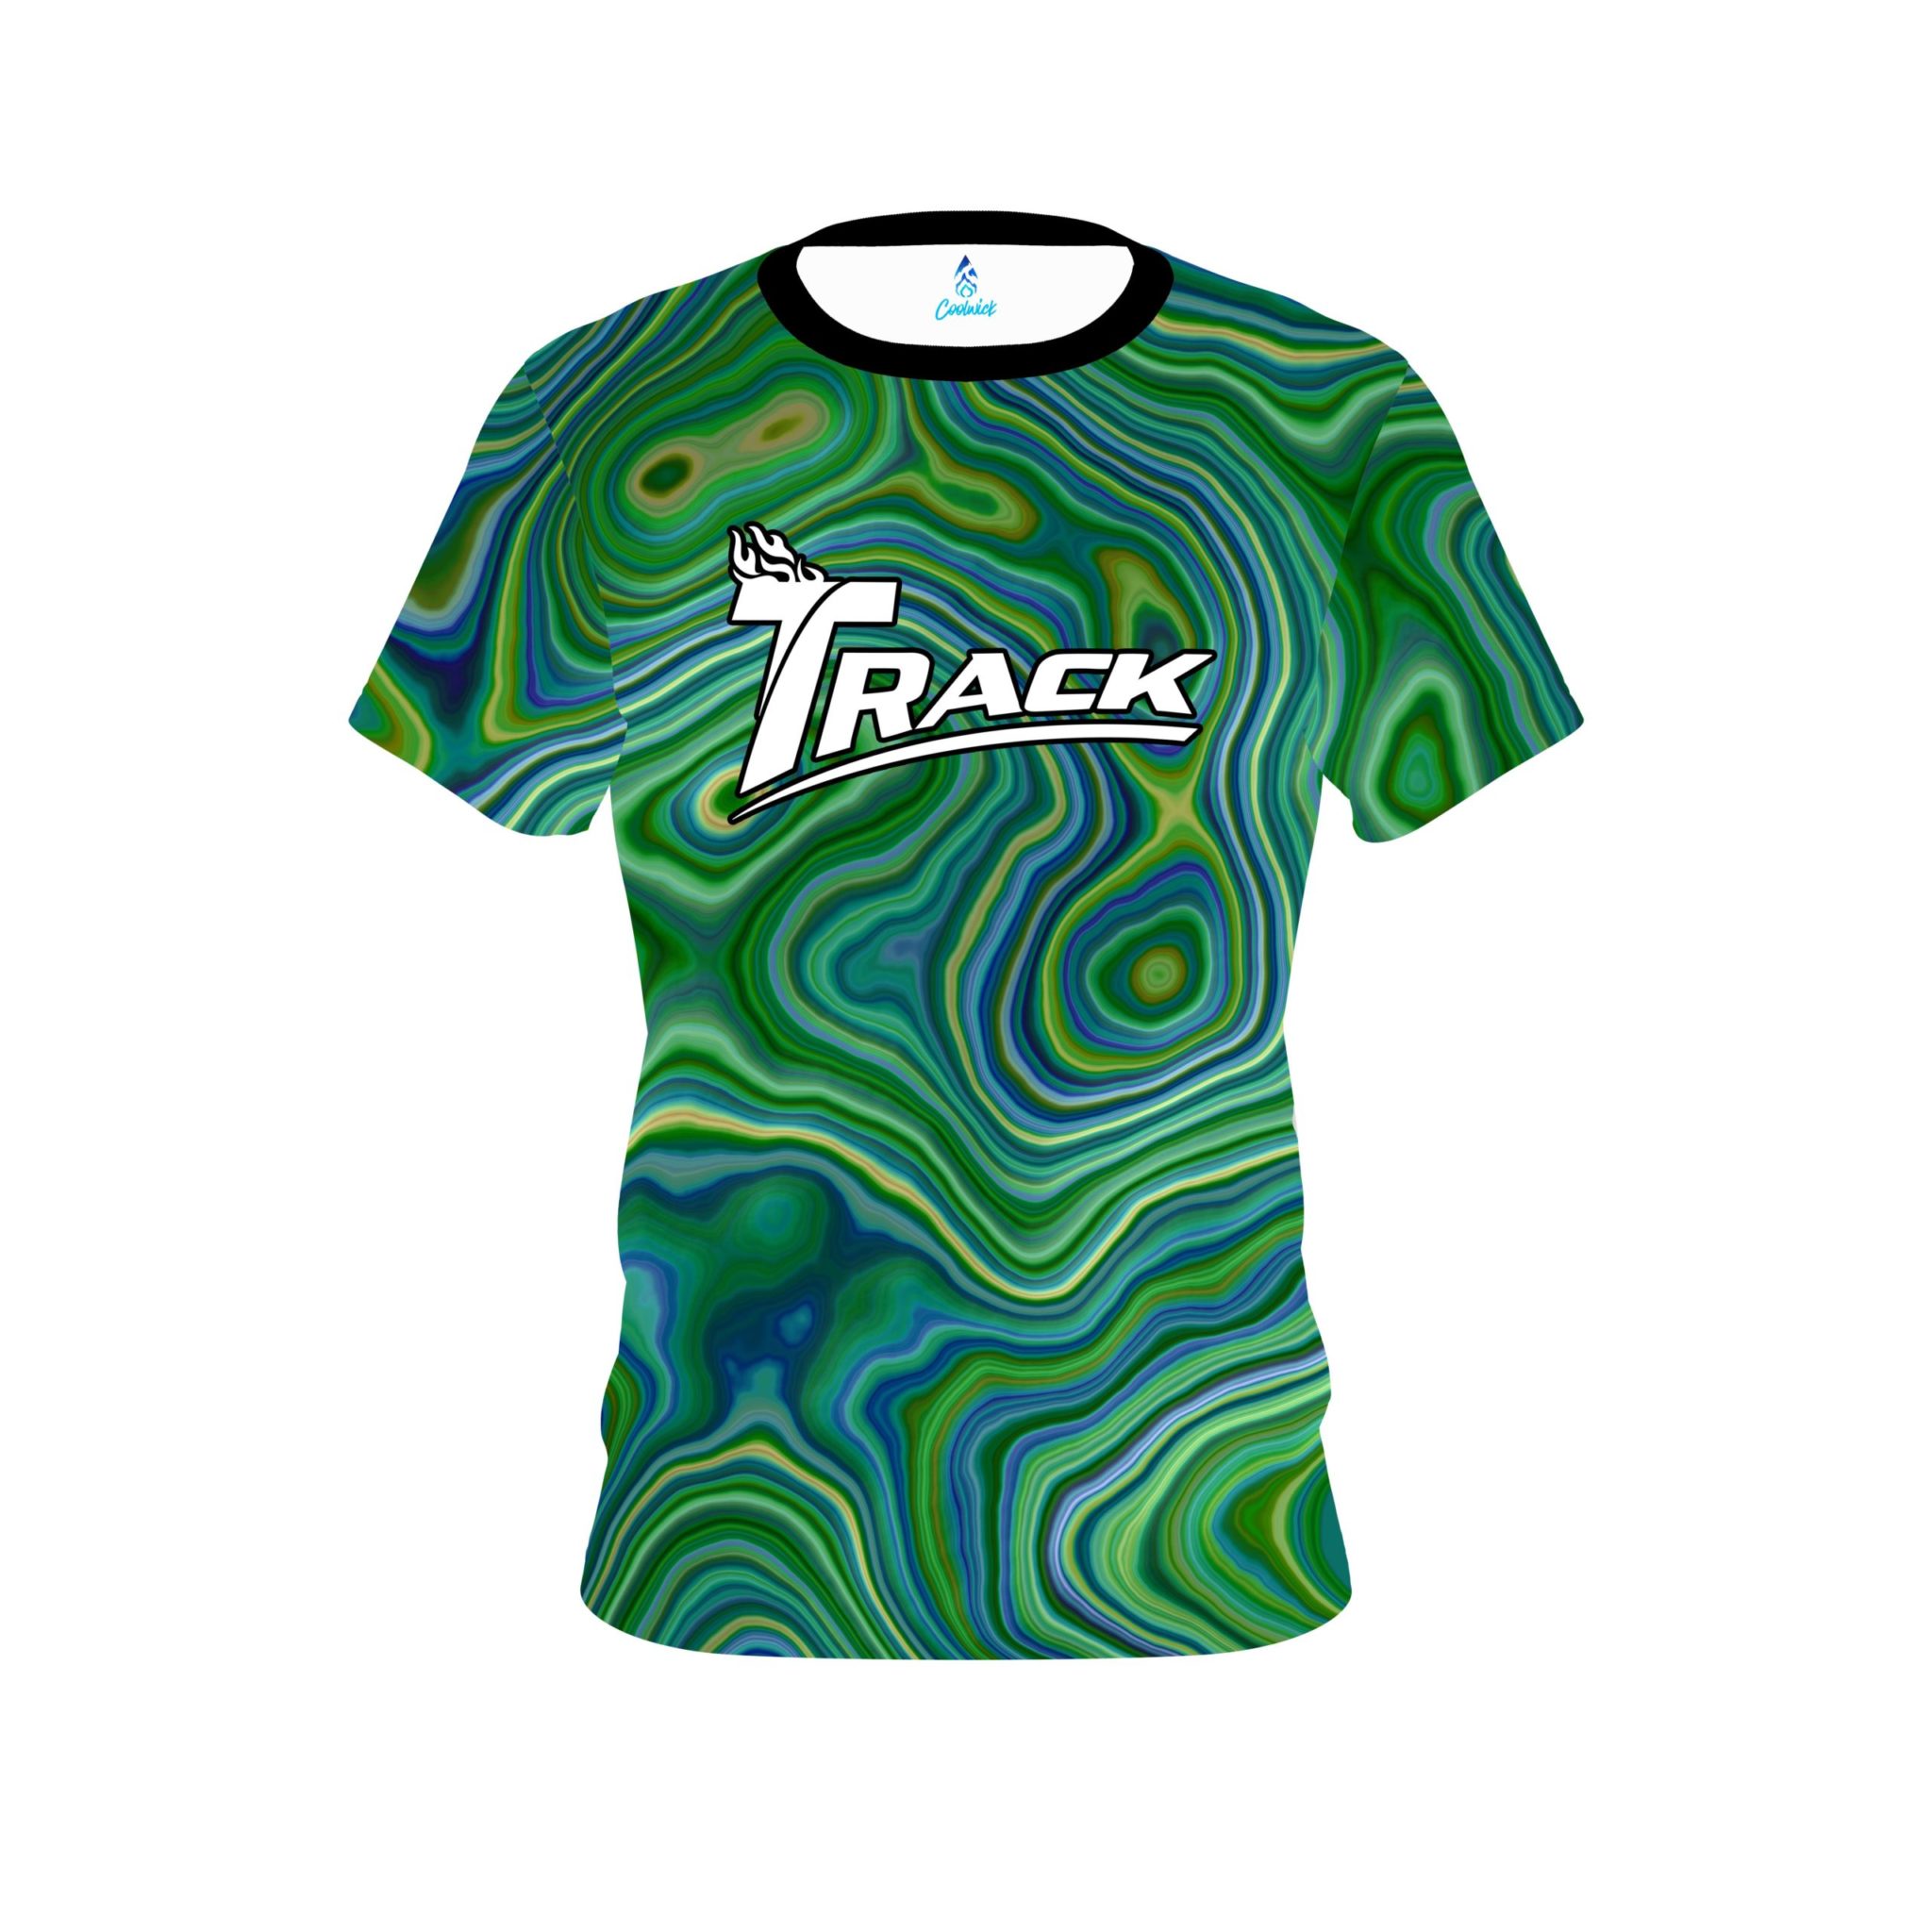 Track Green Hallucinate CoolWick Bowling Jersey